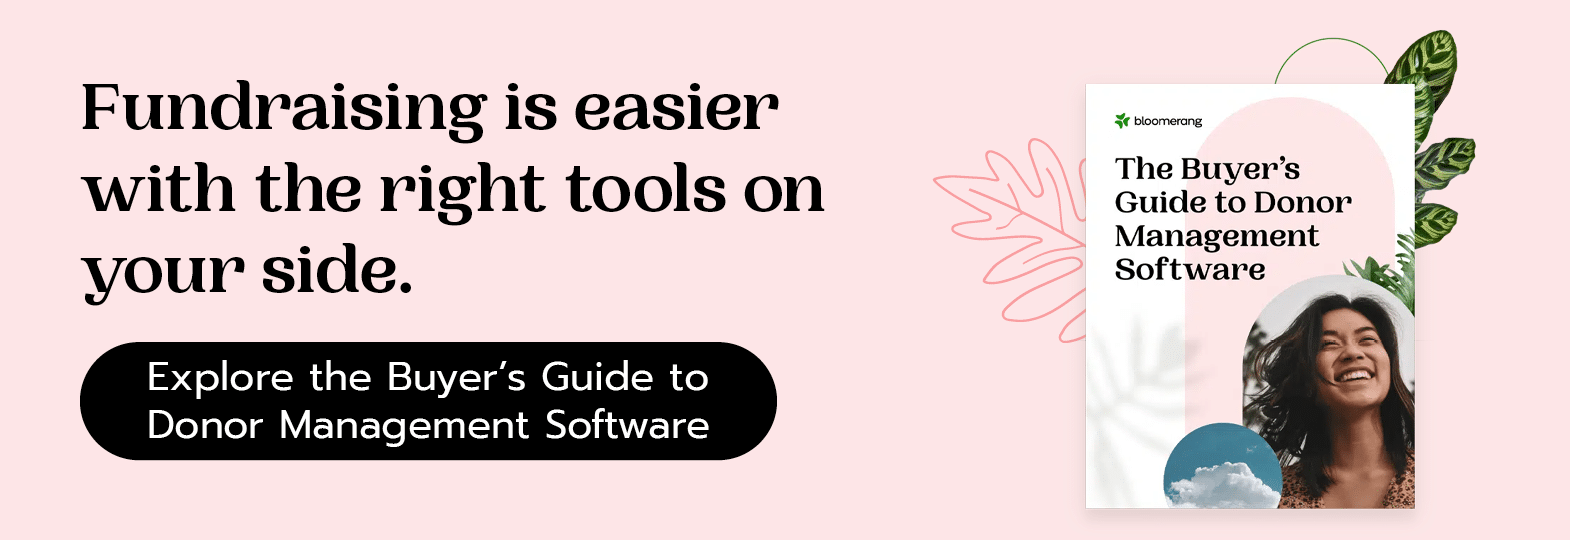 Fundraising is easier with the right tools on your side. Click here to explore the Buyer’s Guide to Donor Management Software.